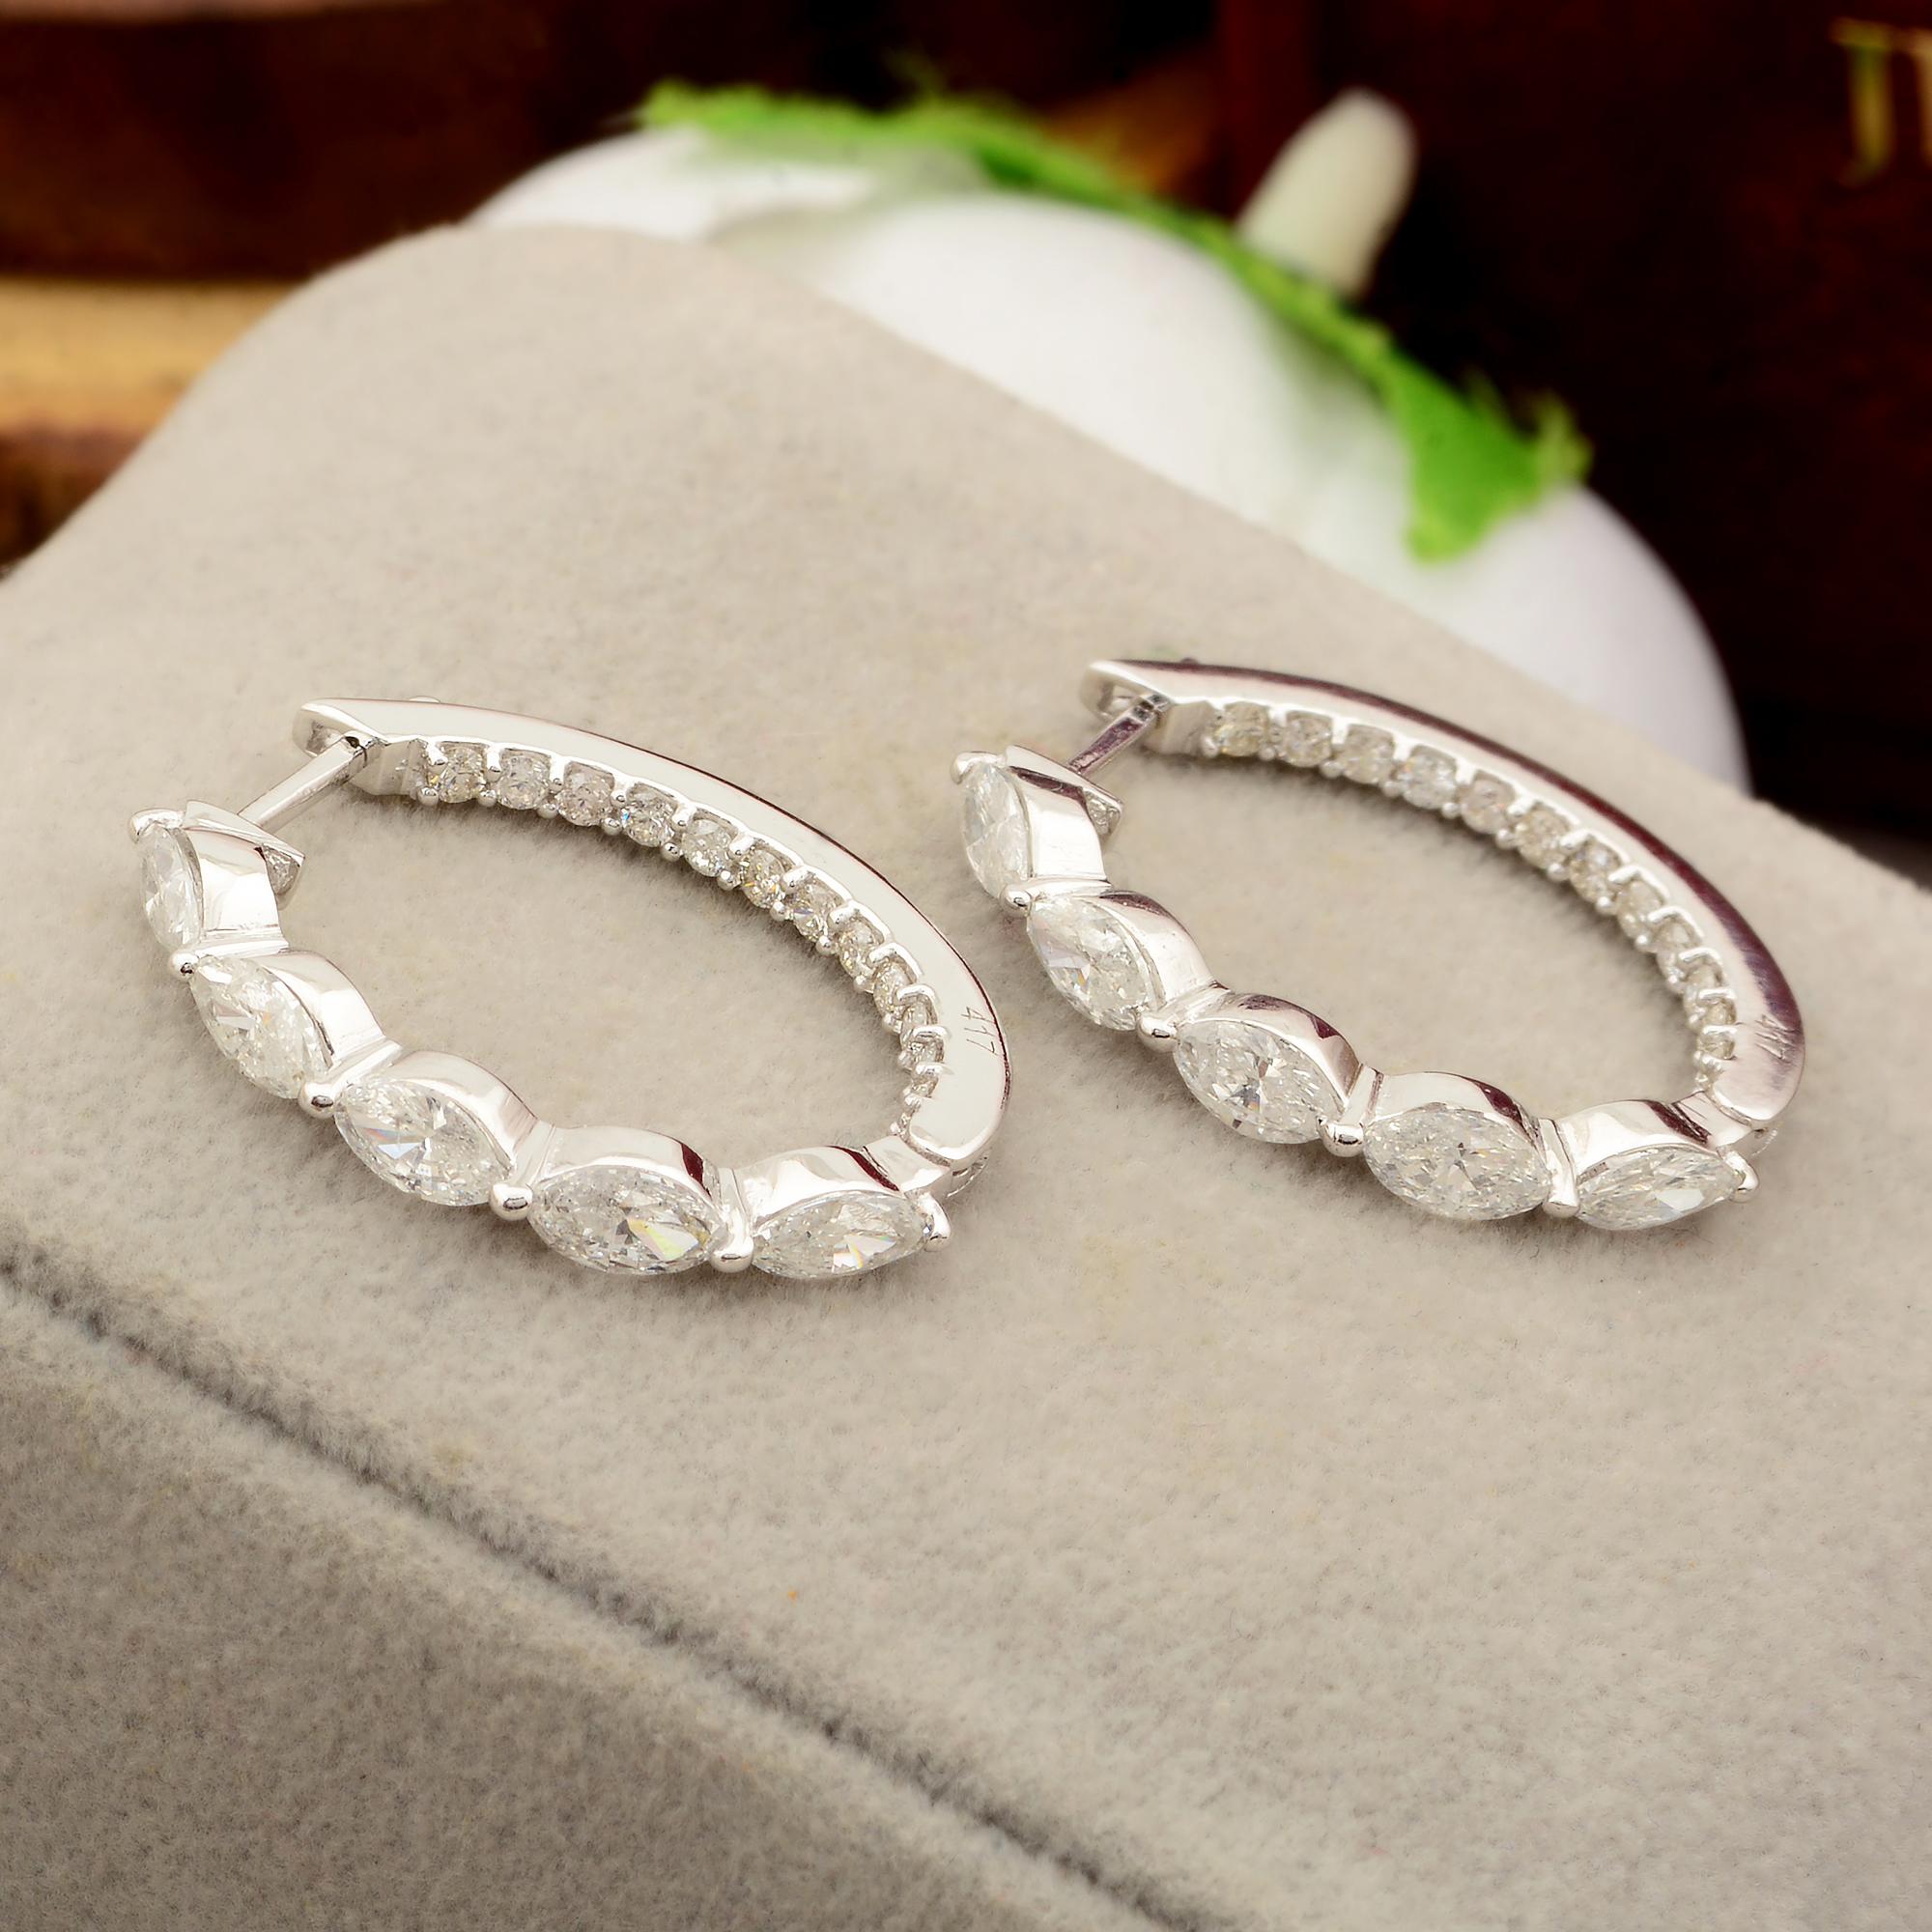 Modern Solid 10k White Gold Natural 1.97 Ct. Marquise Diamond Hoop Earrings New Jewelry For Sale